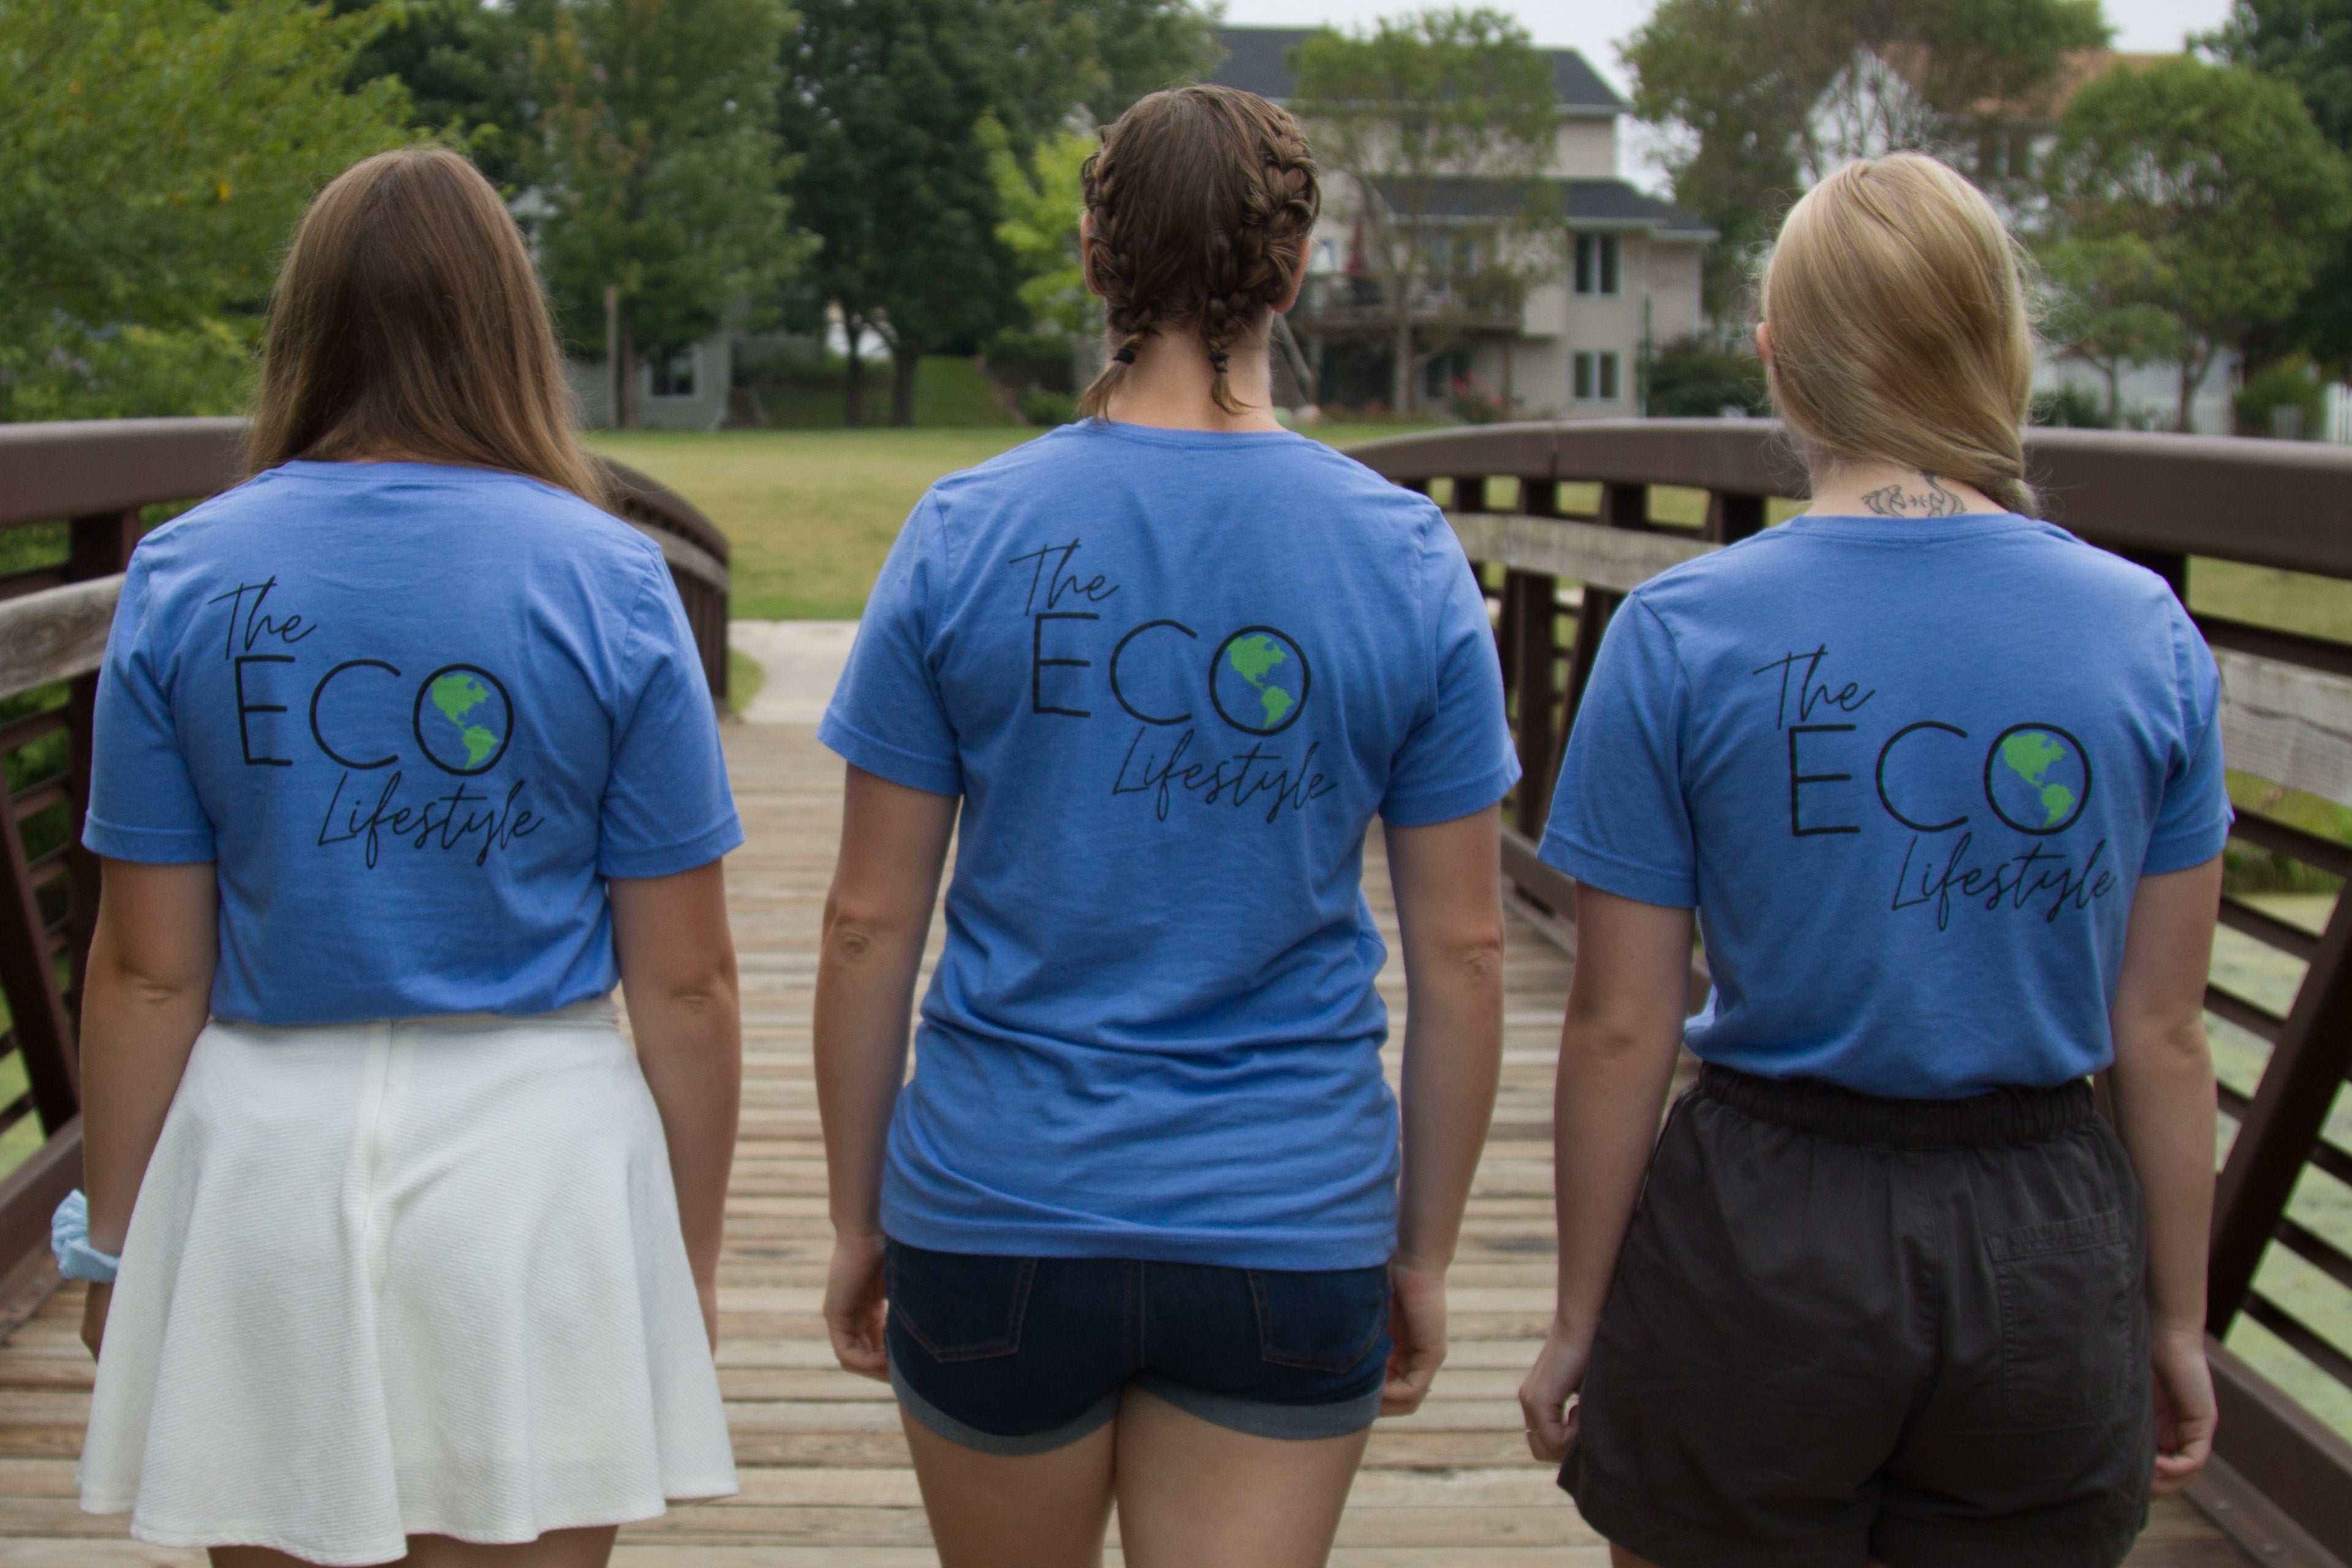 The Eco Lifestyle - T-Shirt